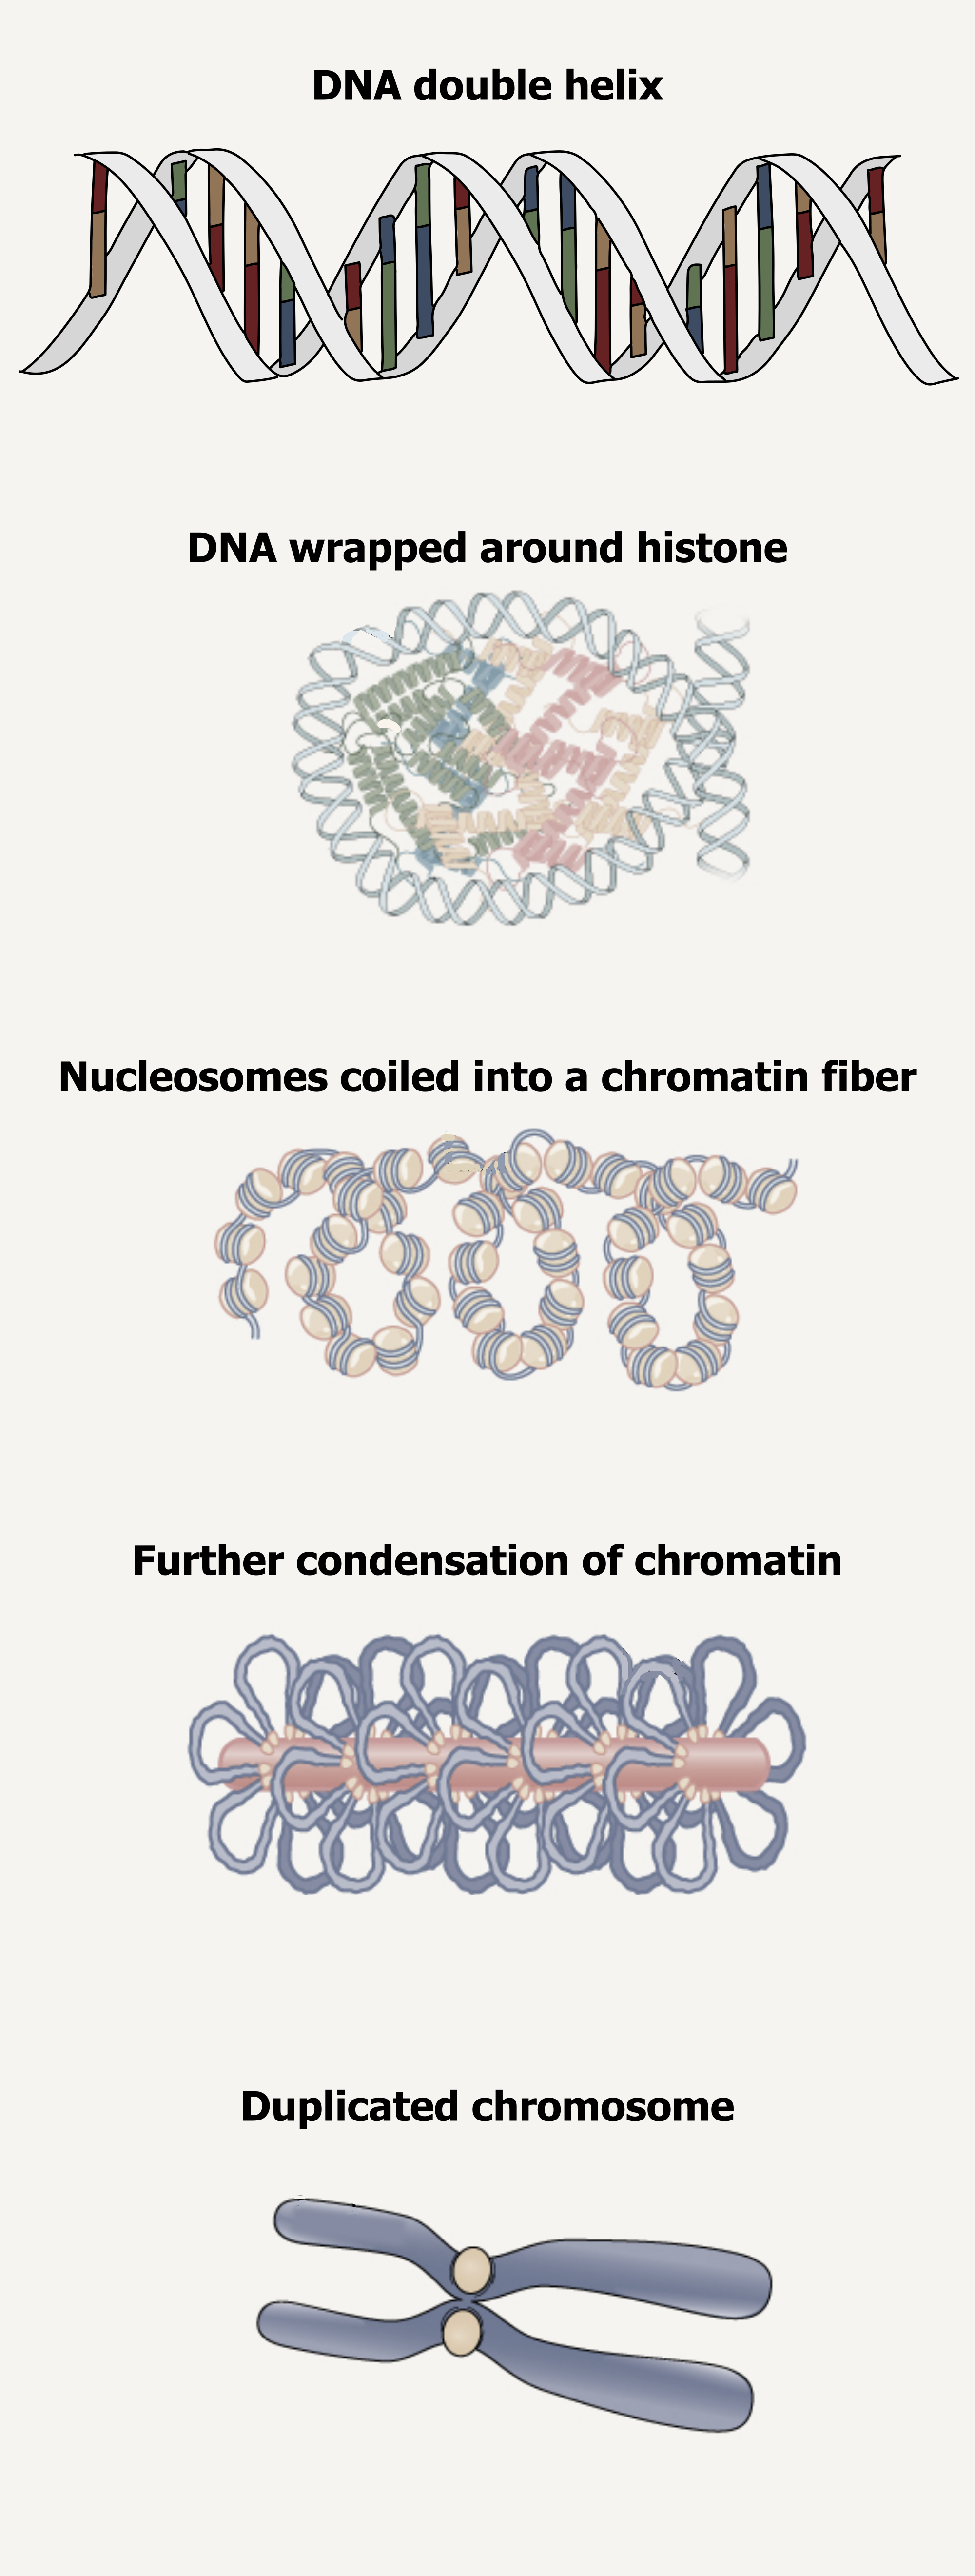 DNA double helix: described in figure 10.3. DNA wrapped around histone: A DNA double helix wrapped around four types of core histones shown as different colors. Nucleosomes coiled into a chromatin fiber: The nucleosomes are arranged in a zig-zag pattern and form a two-start helix shape. Further condensation of chromatin: Central matrix depicted as a long cylinder with loops in a miniband shape. Duplicated chromosome: Paired linear chromosomes that are connected in an elongated X shape with two circles representing the centromere at the connection point.